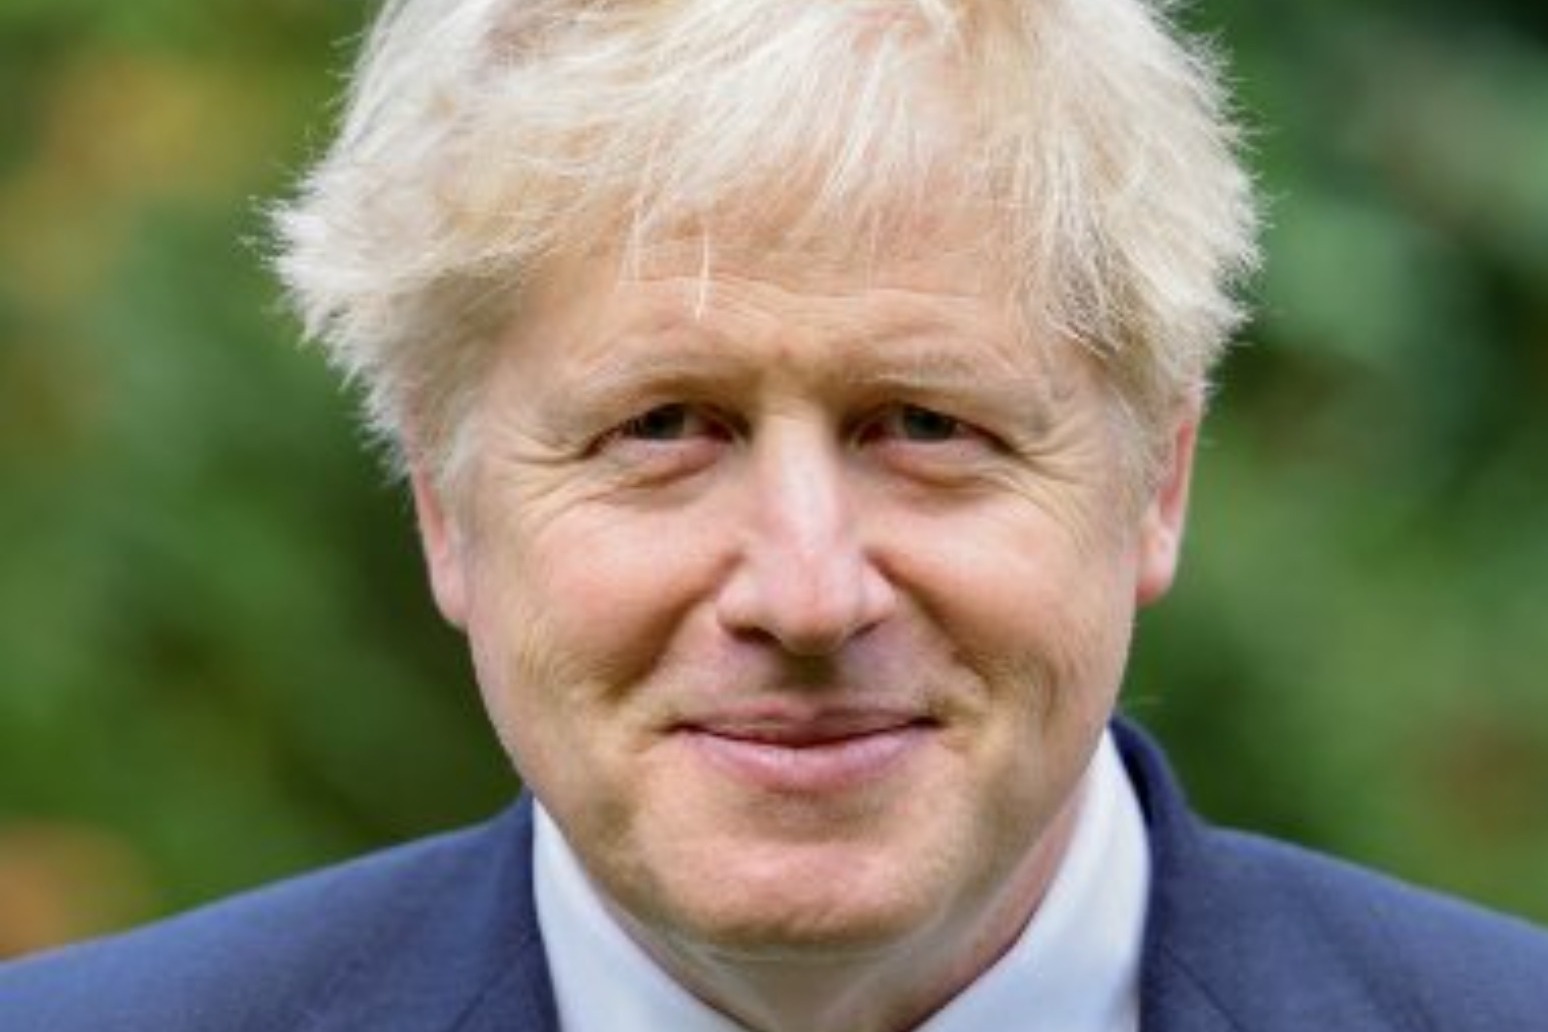 Johnson accused of a ‘chilling’ disregard for cancer patients. 